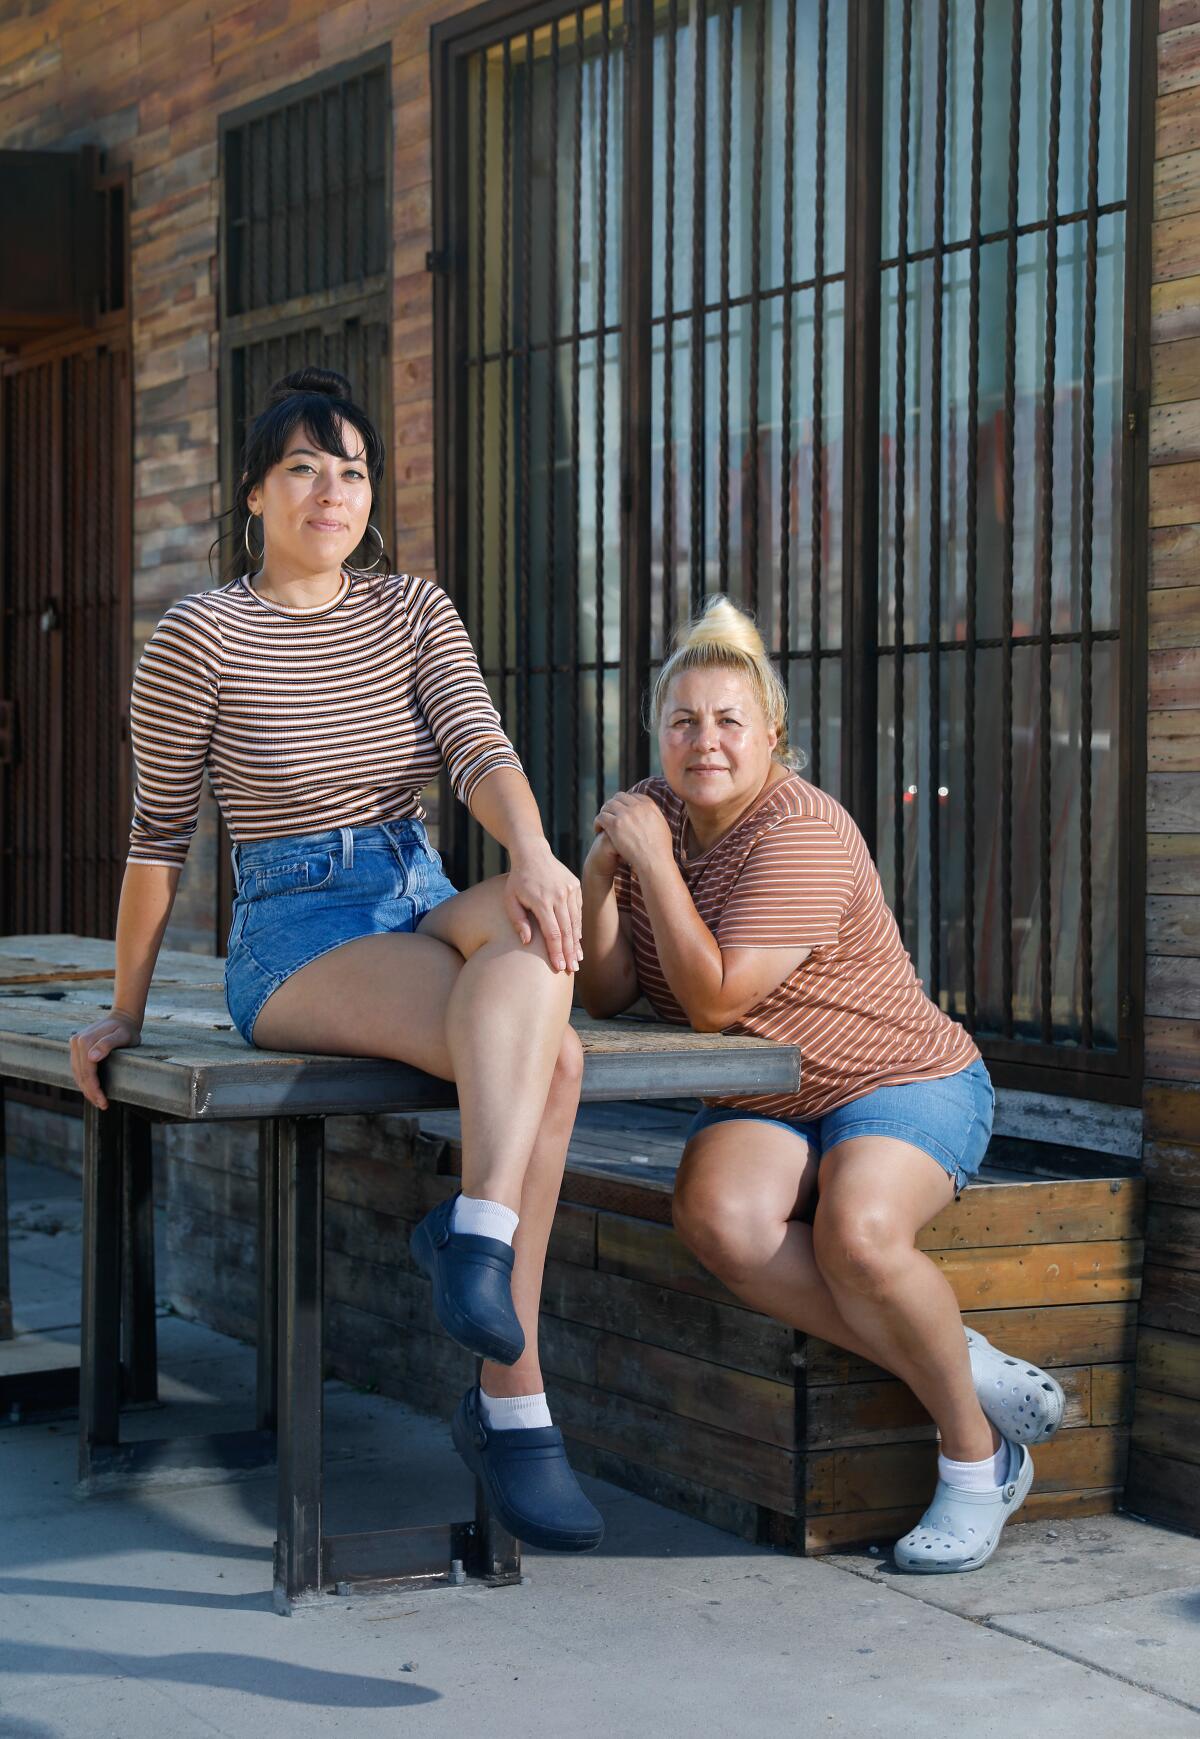 A woman seated on a table and a woman seated on its bench, both wearing Crocs, striped shirts and jean shorts.